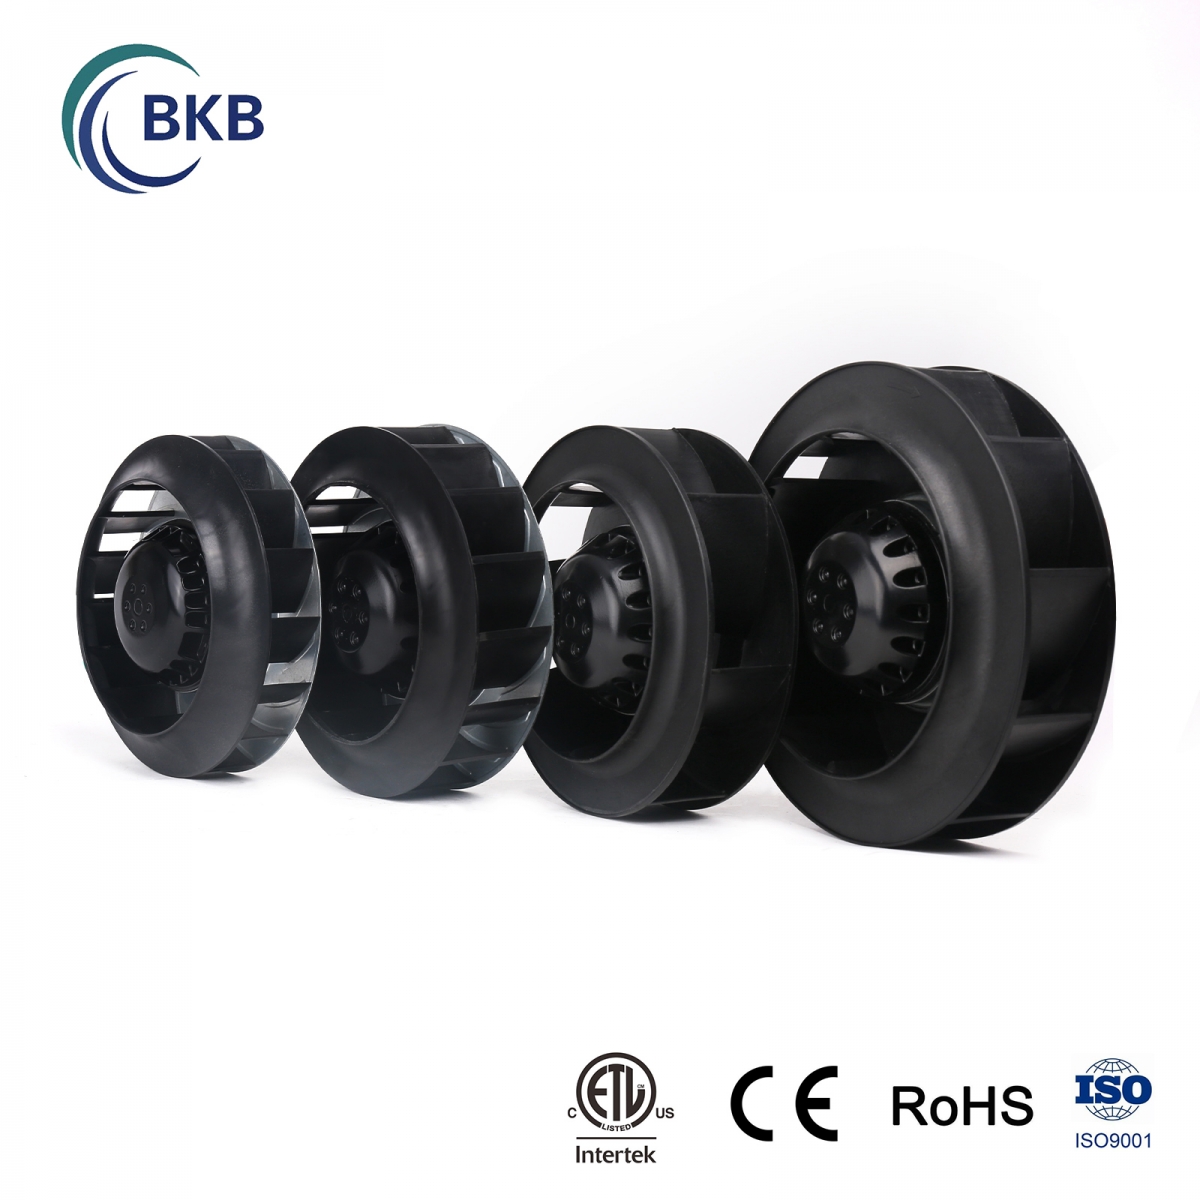 Due to rapid industrialization and land shortage, hydroponic technology is widely used.-SUNLIGHT BLOWER,Centrifugal Fans, Inline Fans,Motors,Backward curved centrifugal fans ,Forward curved centrifugal fans ,inlet fans, EC fans